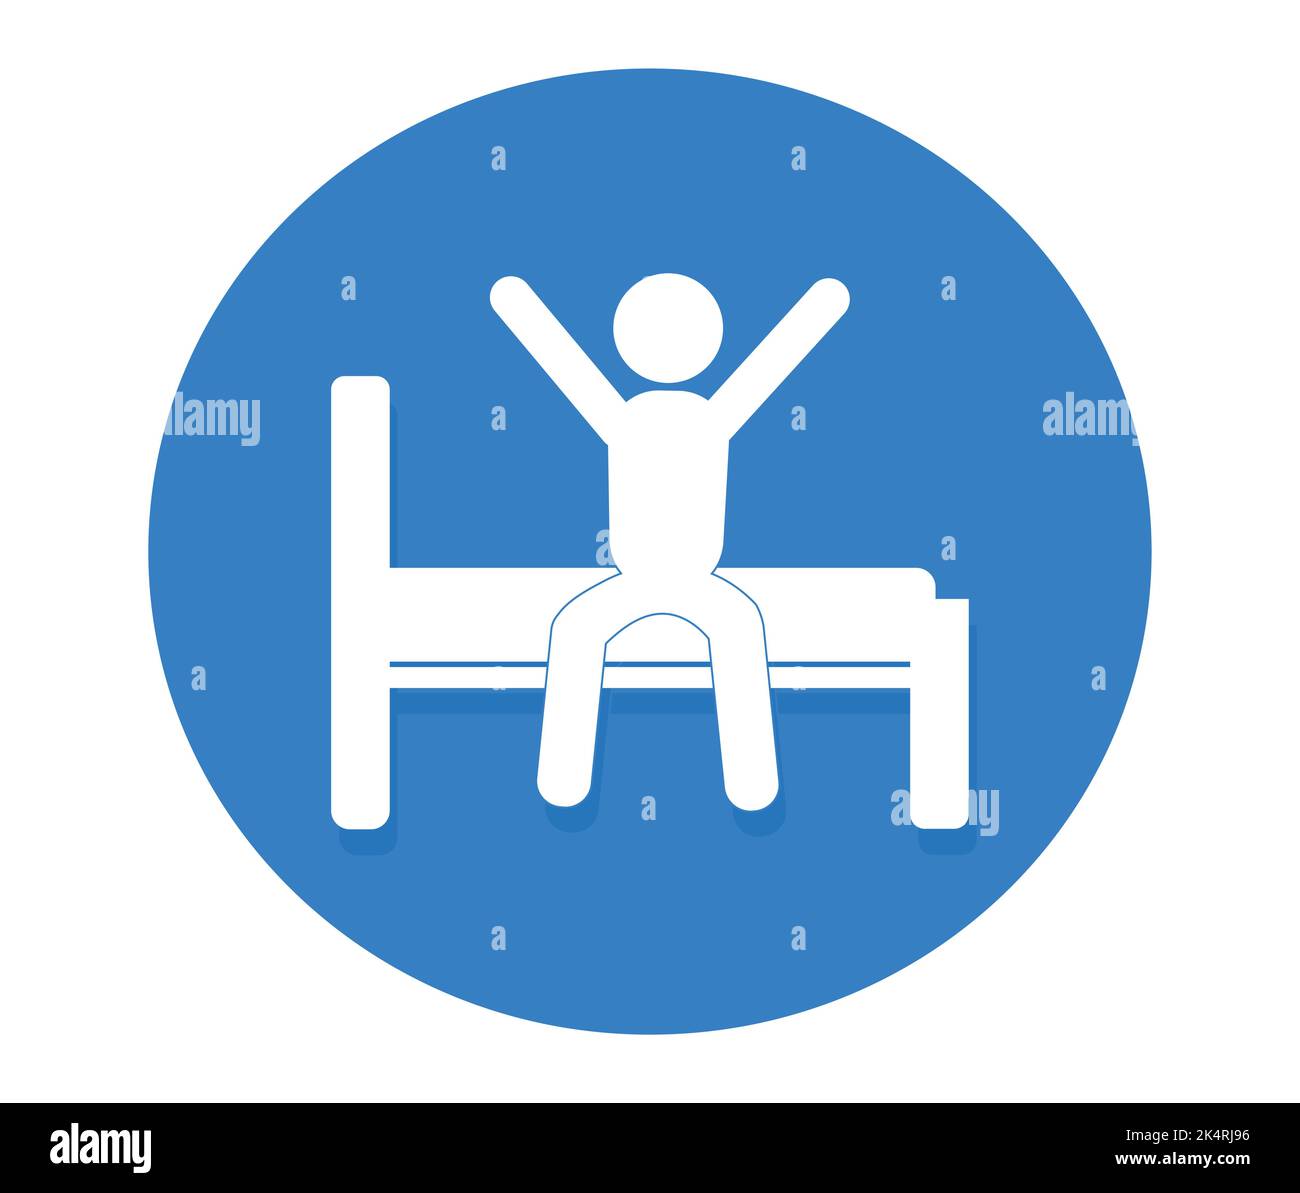 Isolated waking up icon. Concept of pictogram and daily routines. Stock Vector